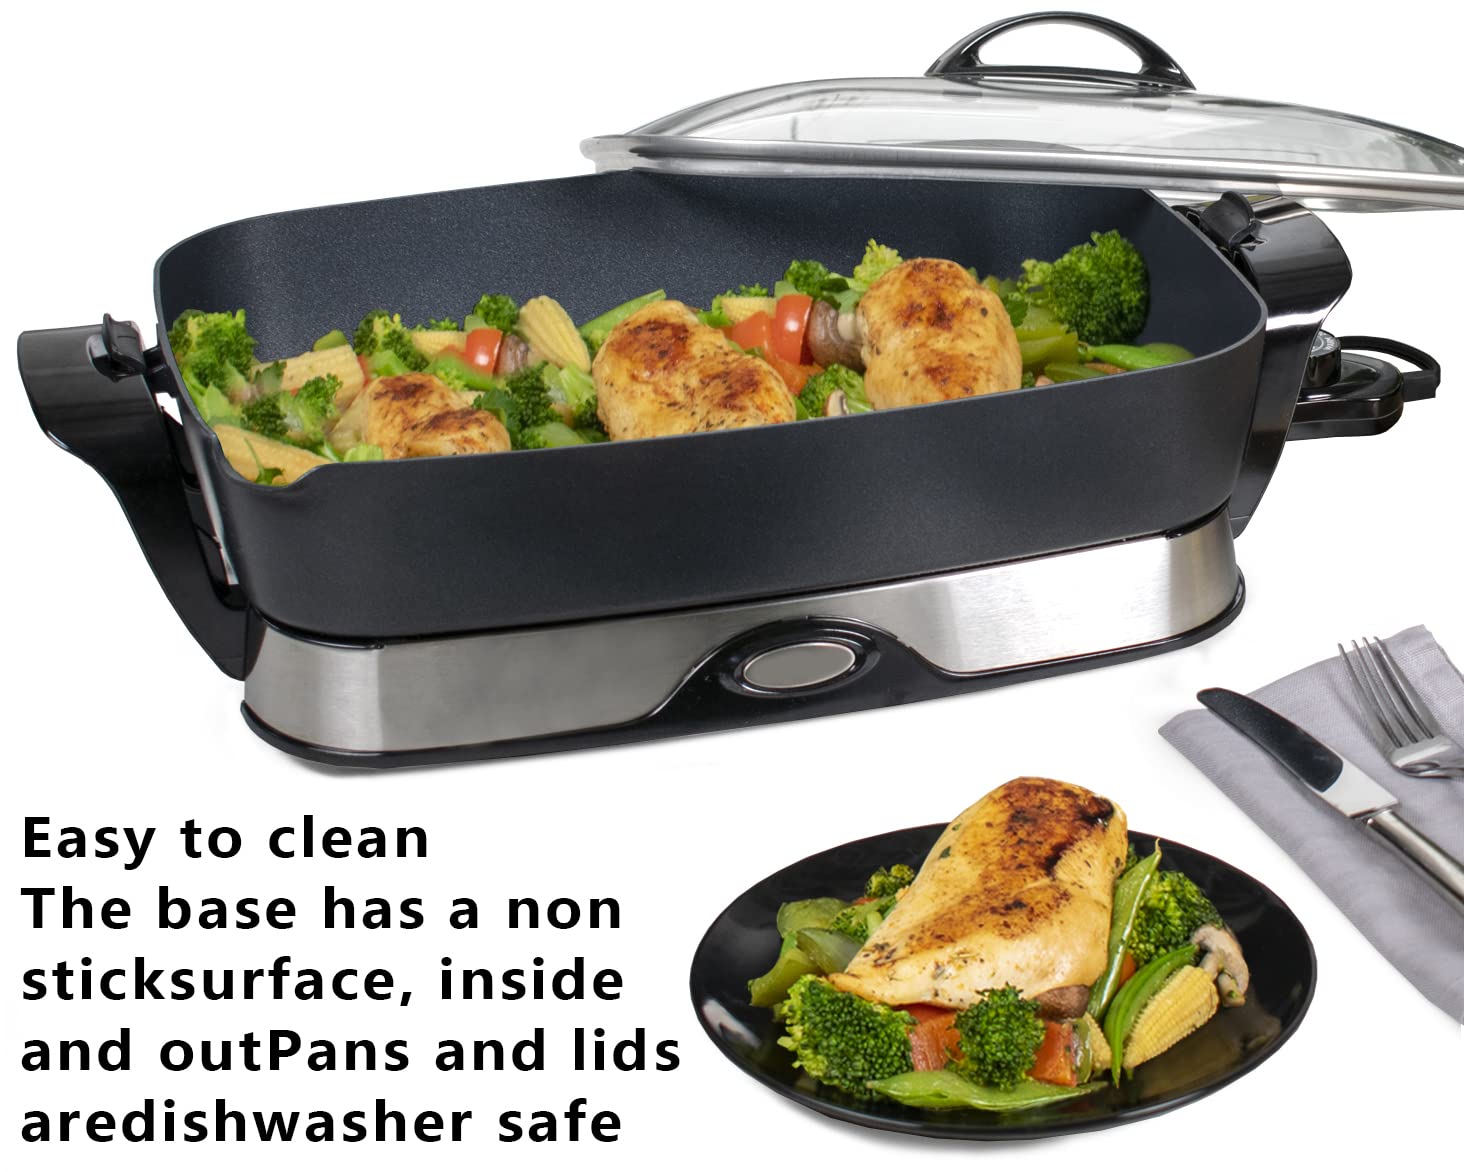 16-inch Electric Foldaway Nonstick Skillet - with Tempered glass cover & stay-cool handles allow skillet to double as a buffet server, black